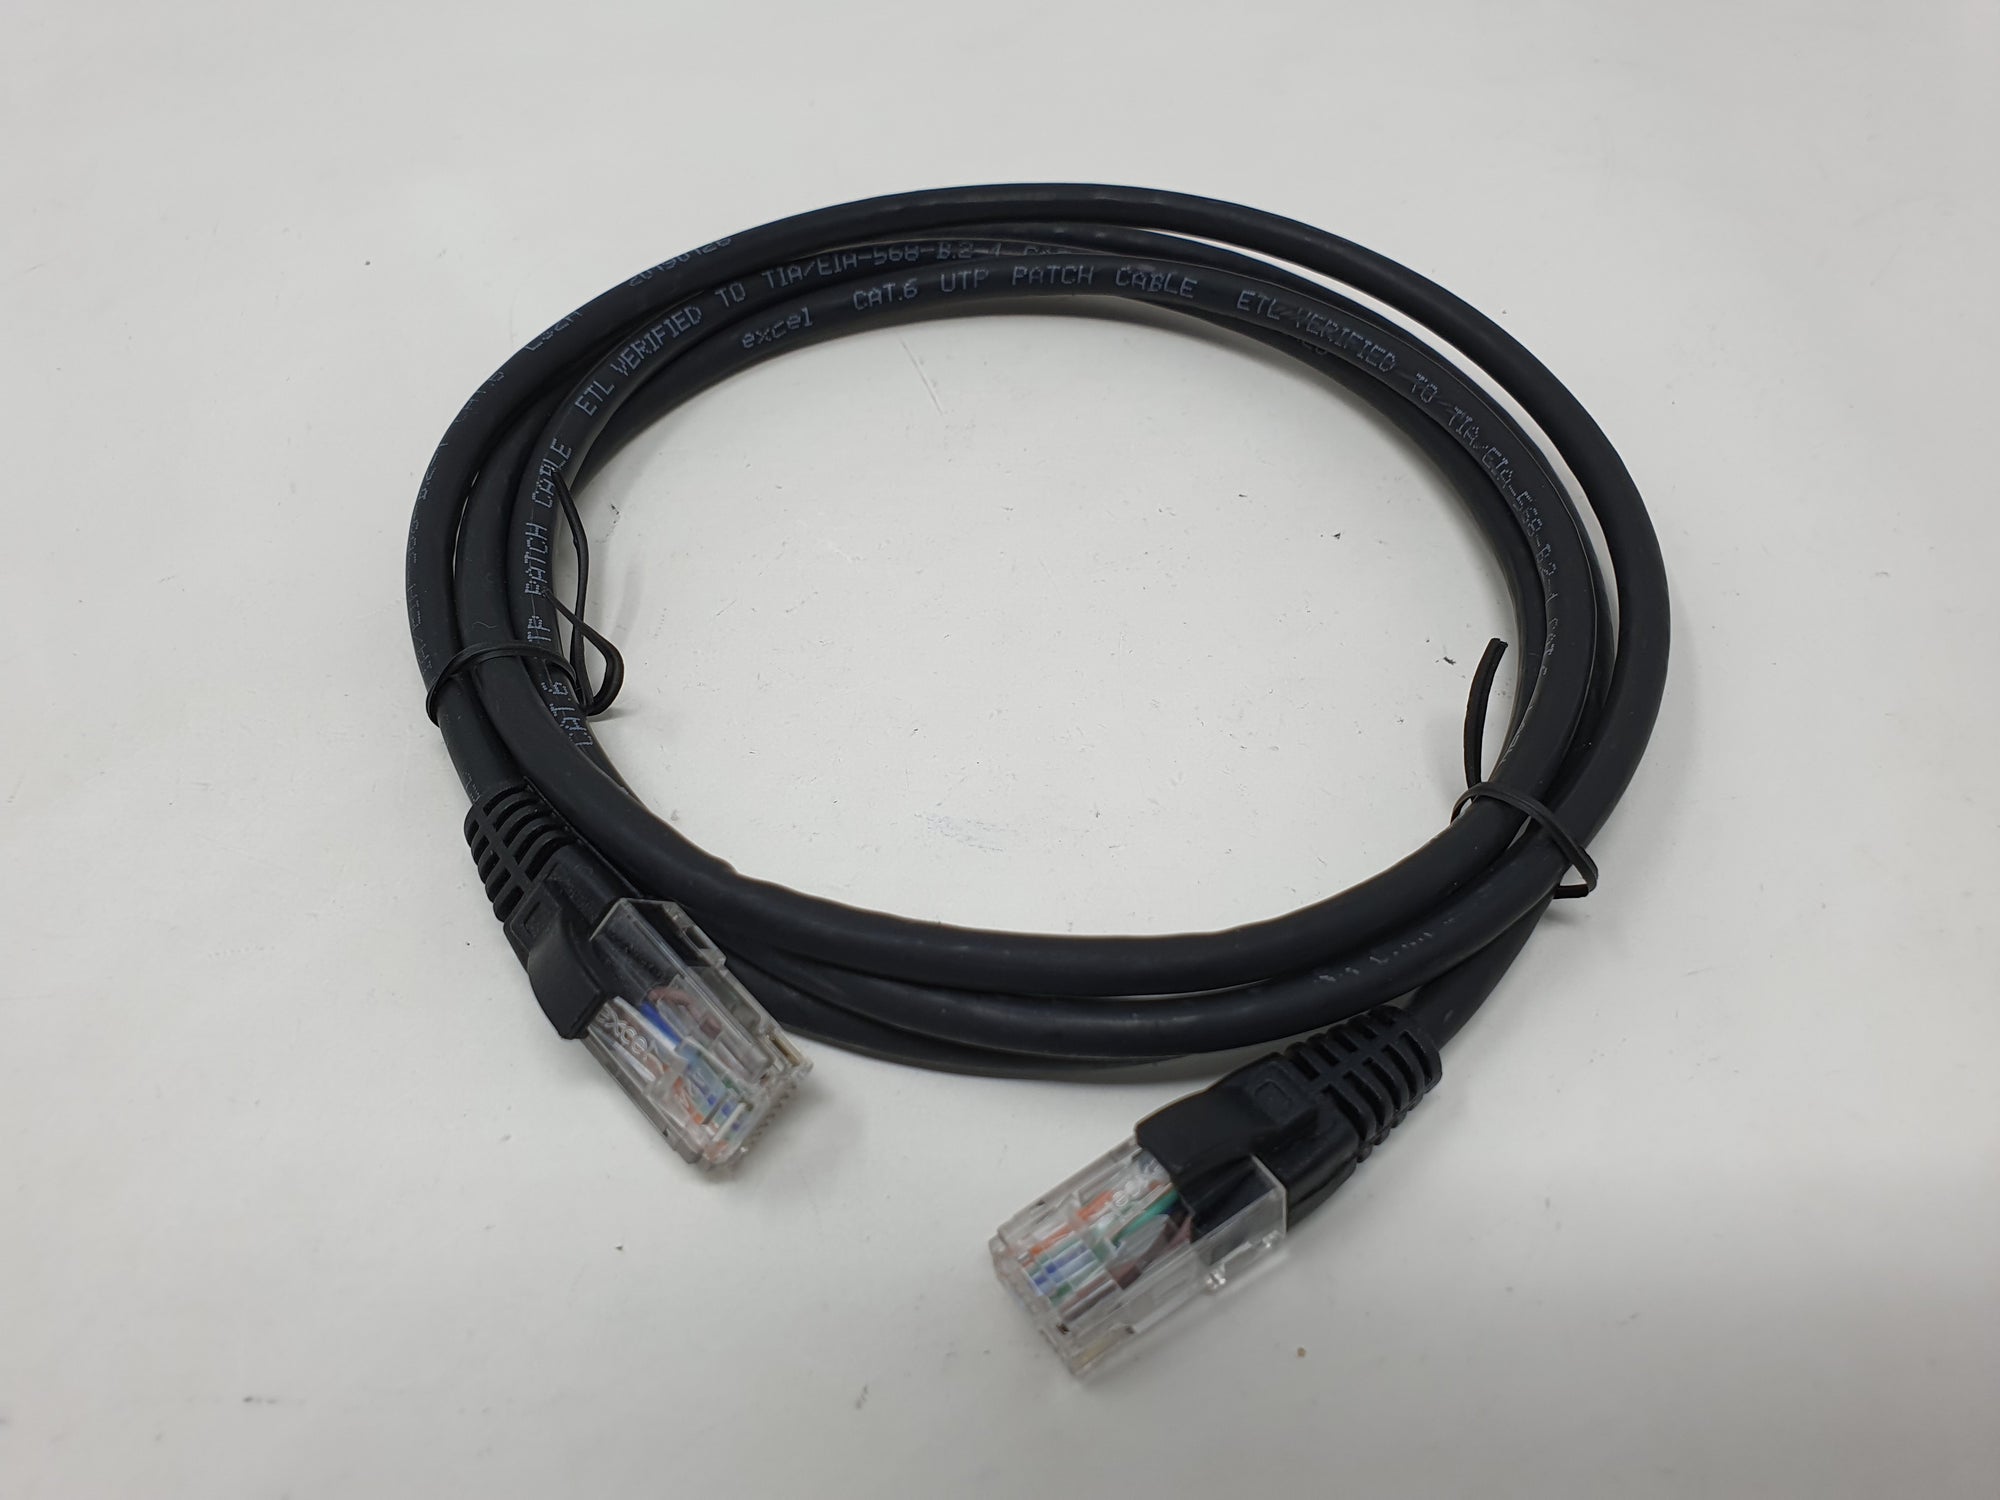 Network Ethernet LAN Cable CAT.6  CAT.5 UTP RJ45 For Computer, Game consoles, TV